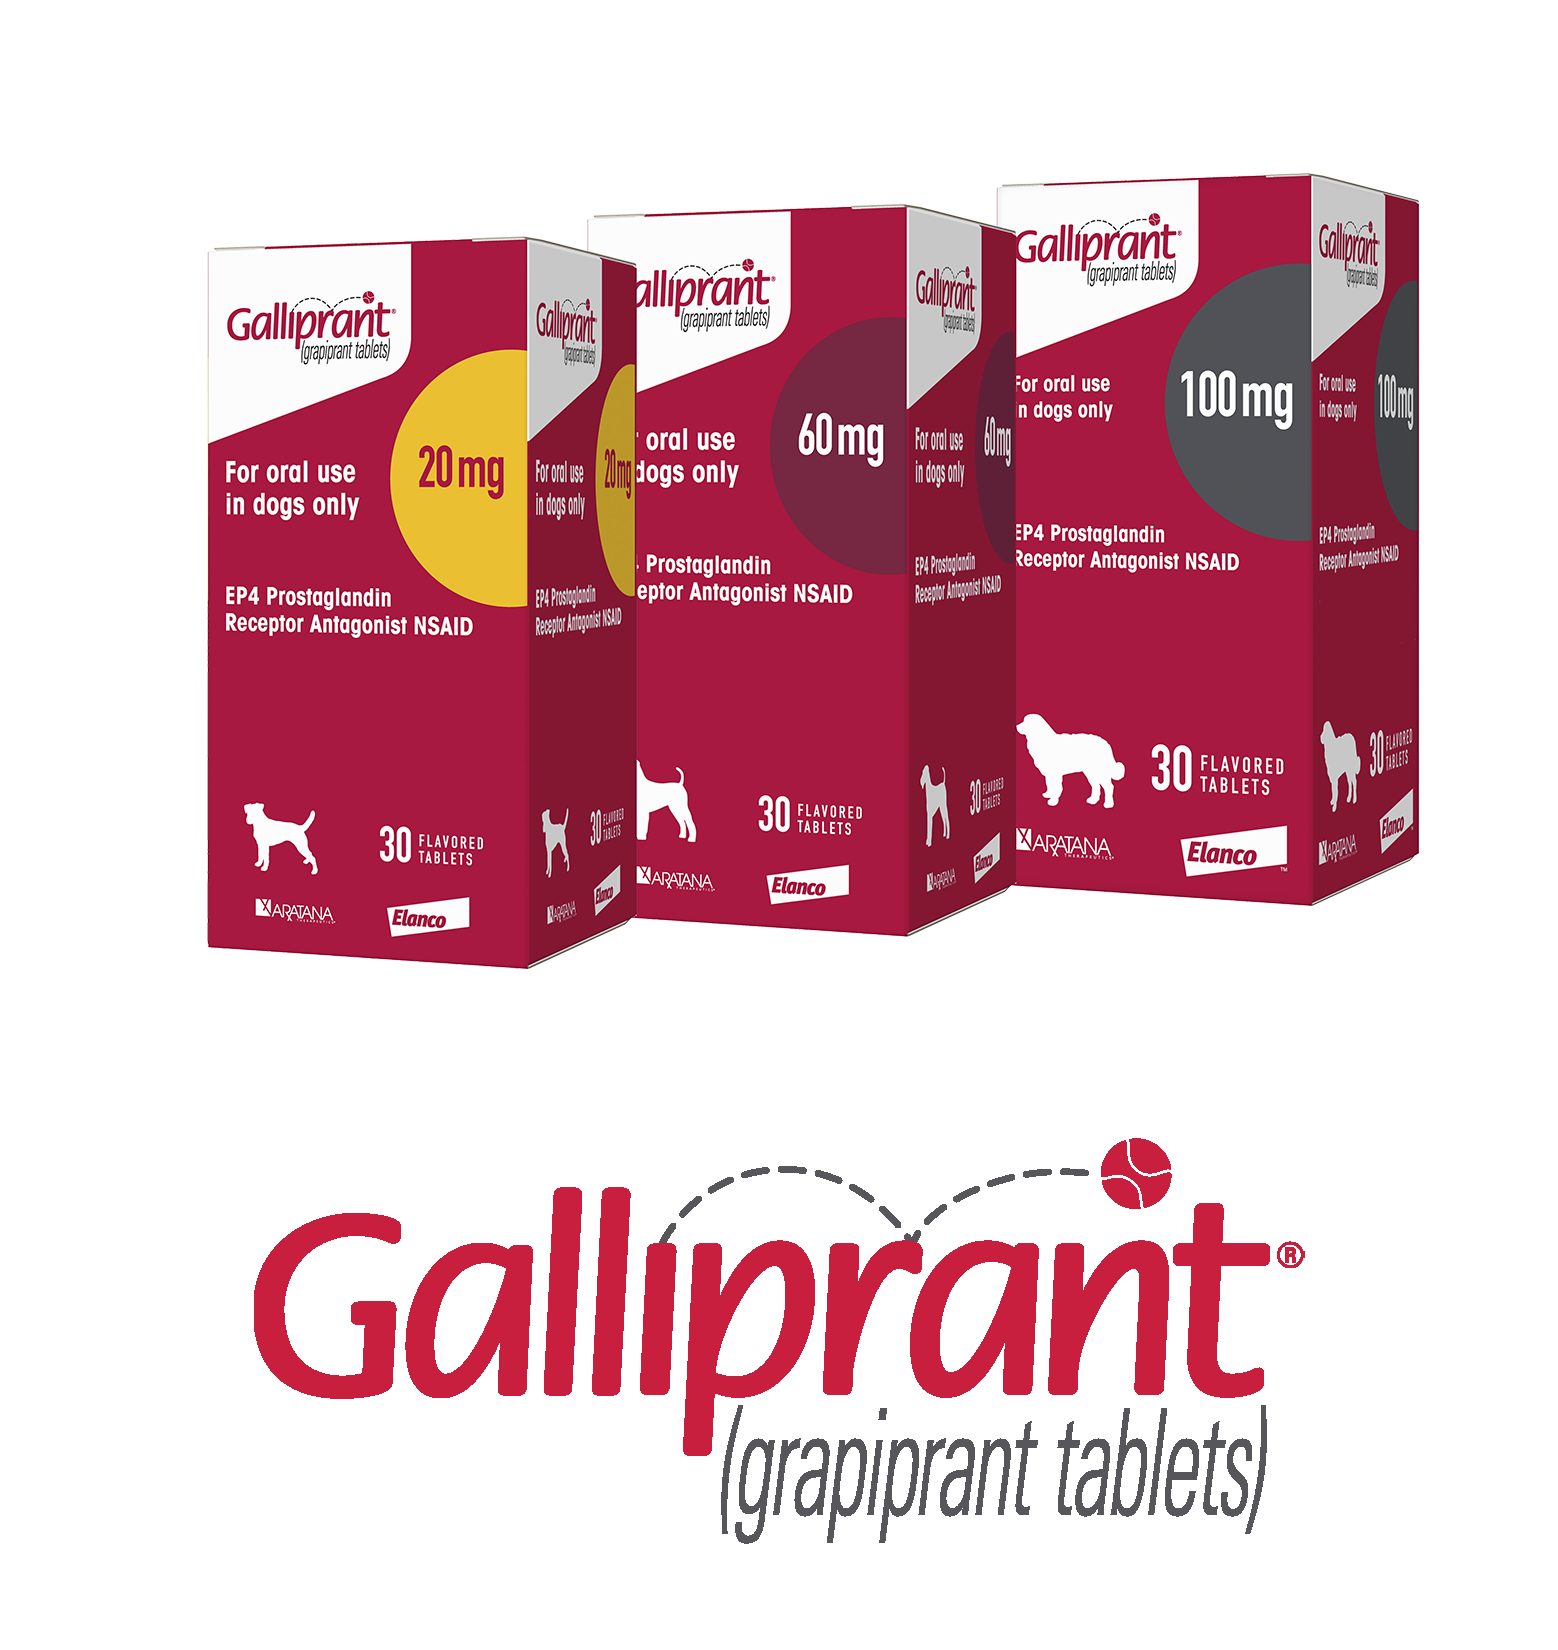 Galliprant is available in 20MG, 60MG, and 100MG